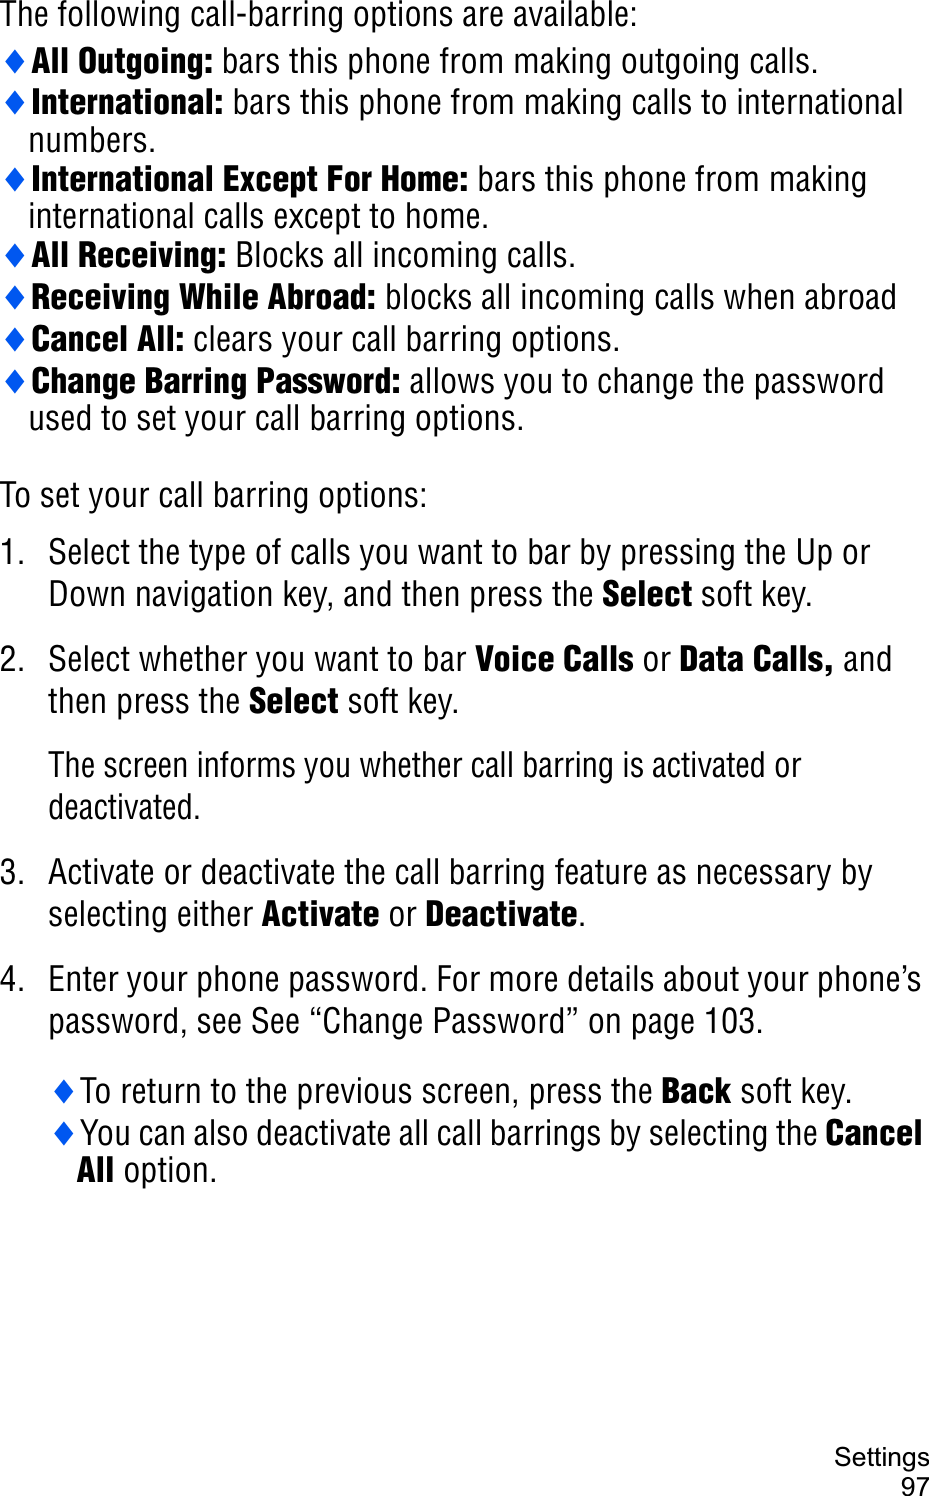 Settings97The following call-barring options are available:iAll Outgoing: bars this phone from making outgoing calls.iInternational: bars this phone from making calls to international numbers.iInternational Except For Home: bars this phone from making international calls except to home.iAll Receiving: Blocks all incoming calls.iReceiving While Abroad: blocks all incoming calls when abroadiCancel All: clears your call barring options.iChange Barring Password: allows you to change the password used to set your call barring options.To set your call barring options:1. Select the type of calls you want to bar by pressing the Up or Down navigation key, and then press the Select soft key.2. Select whether you want to bar Voice Calls or Data Calls, and then press the Select soft key.The screen informs you whether call barring is activated or deactivated. 3. Activate or deactivate the call barring feature as necessary by selecting either Activate or Deactivate.4. Enter your phone password. For more details about your phone’s password, see See “Change Password” on page 103.iTo return to the previous screen, press the Back soft key.iYou can also deactivate all call barrings by selecting the Cancel All option.